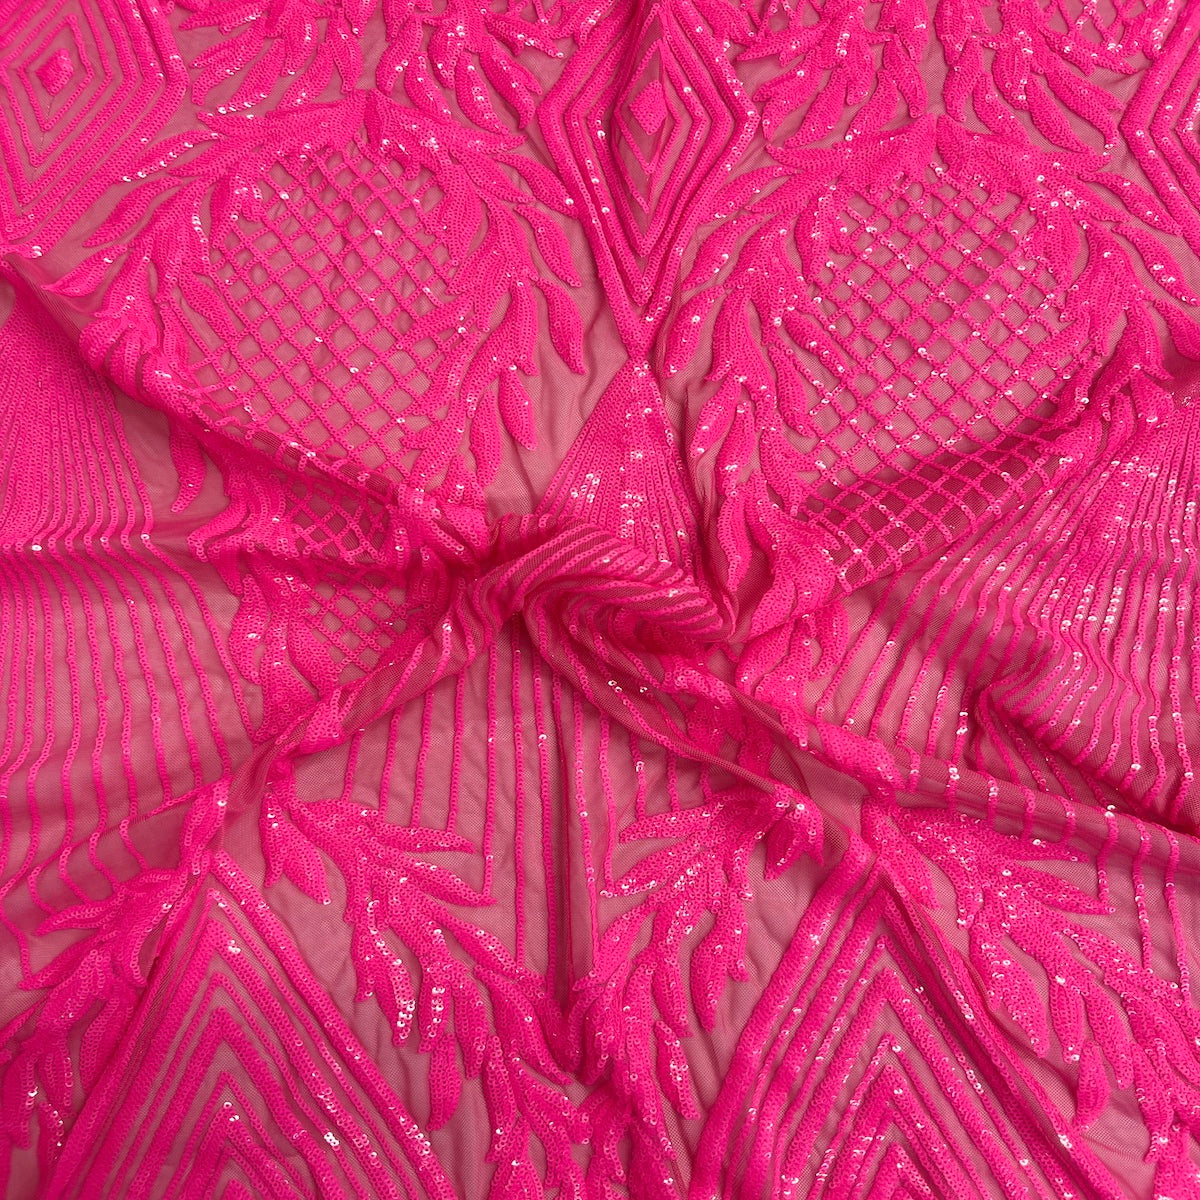 Neon Pink Alpica Sequins Lace Fabric